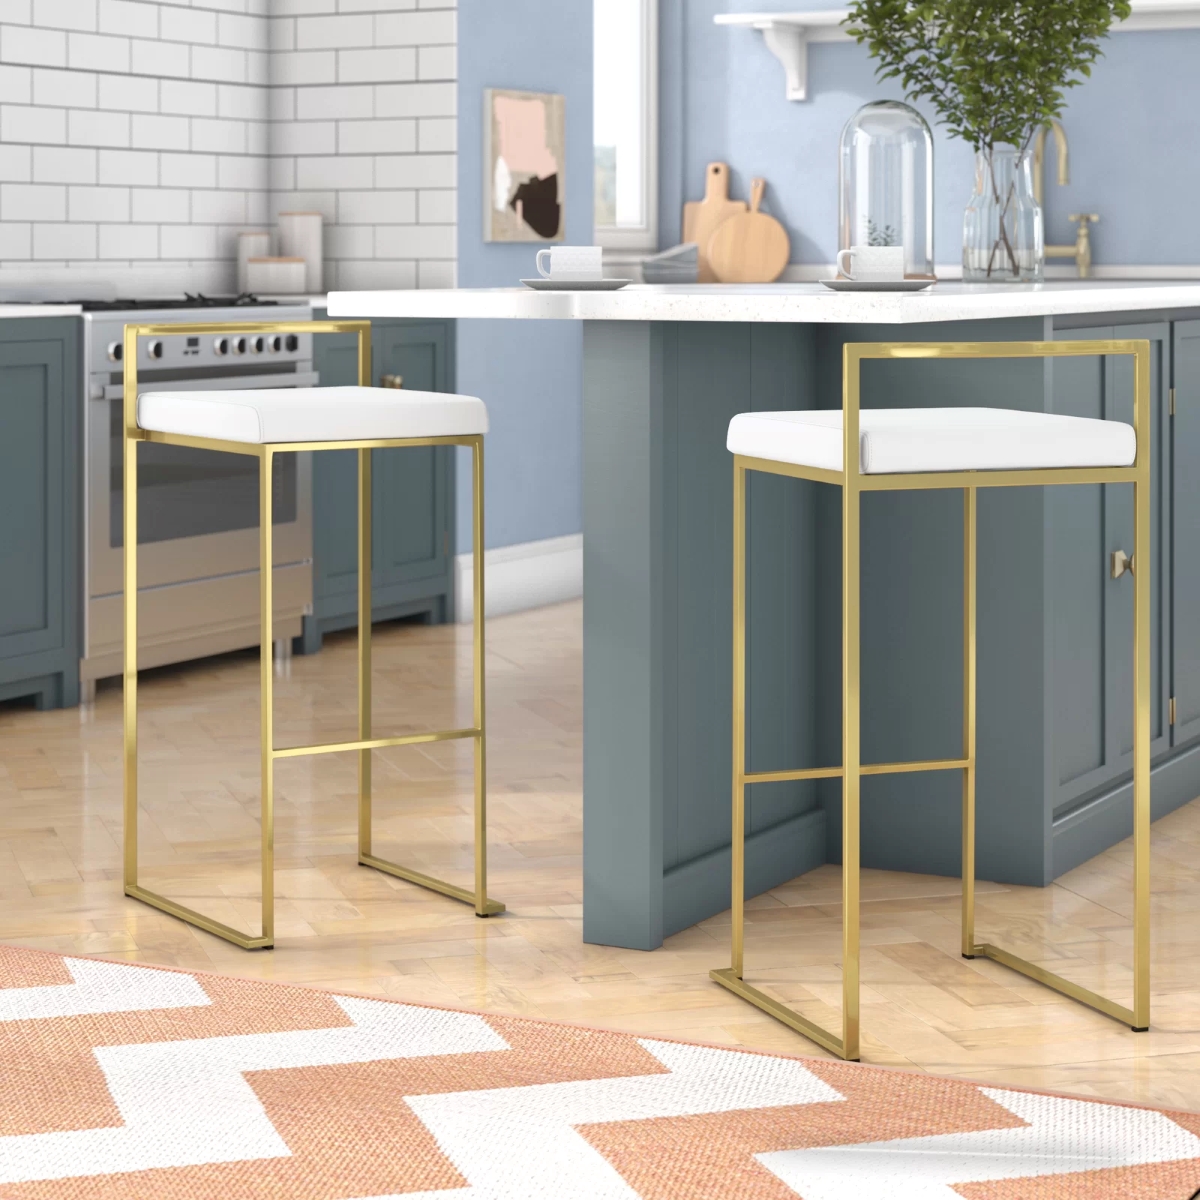 Two kitchen island chairs with white seats and gold metal frames.